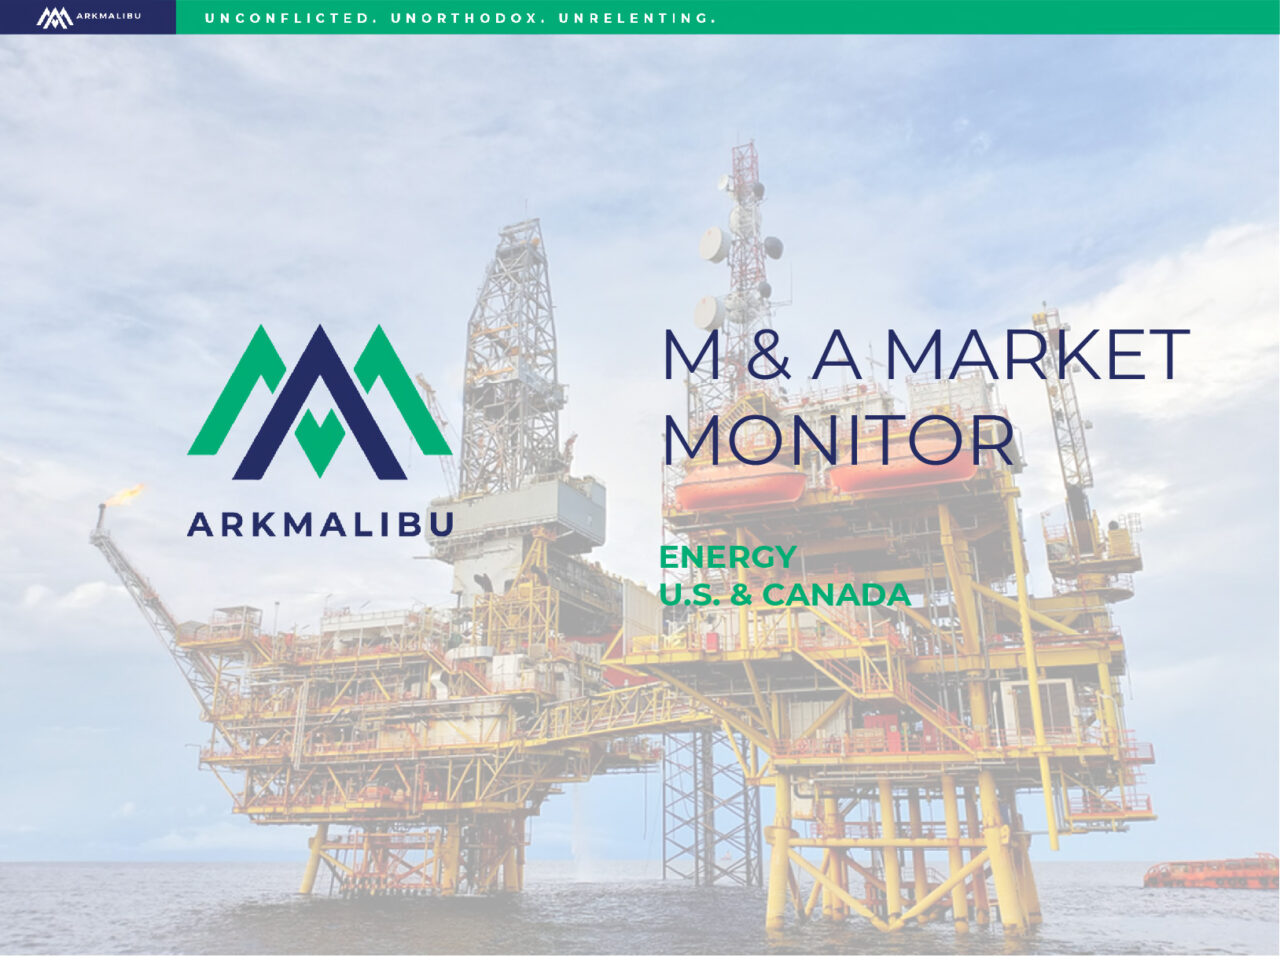 Market Monitor Cover for Energy. Faded Image of an oil platform in the background